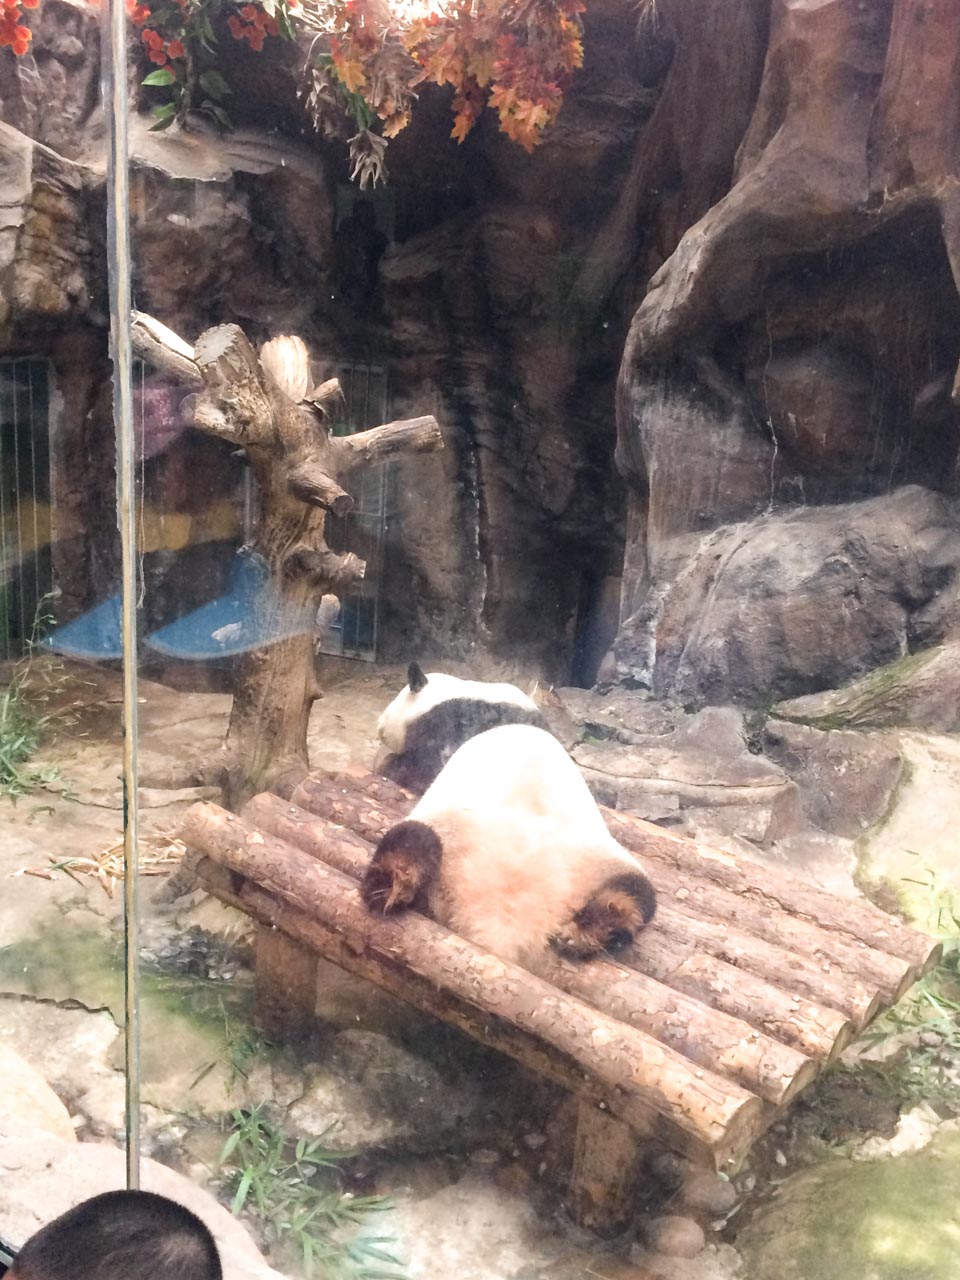 A giant panda resting on a big wooden bench at the Beijing Zoo with its back turned to the visitors